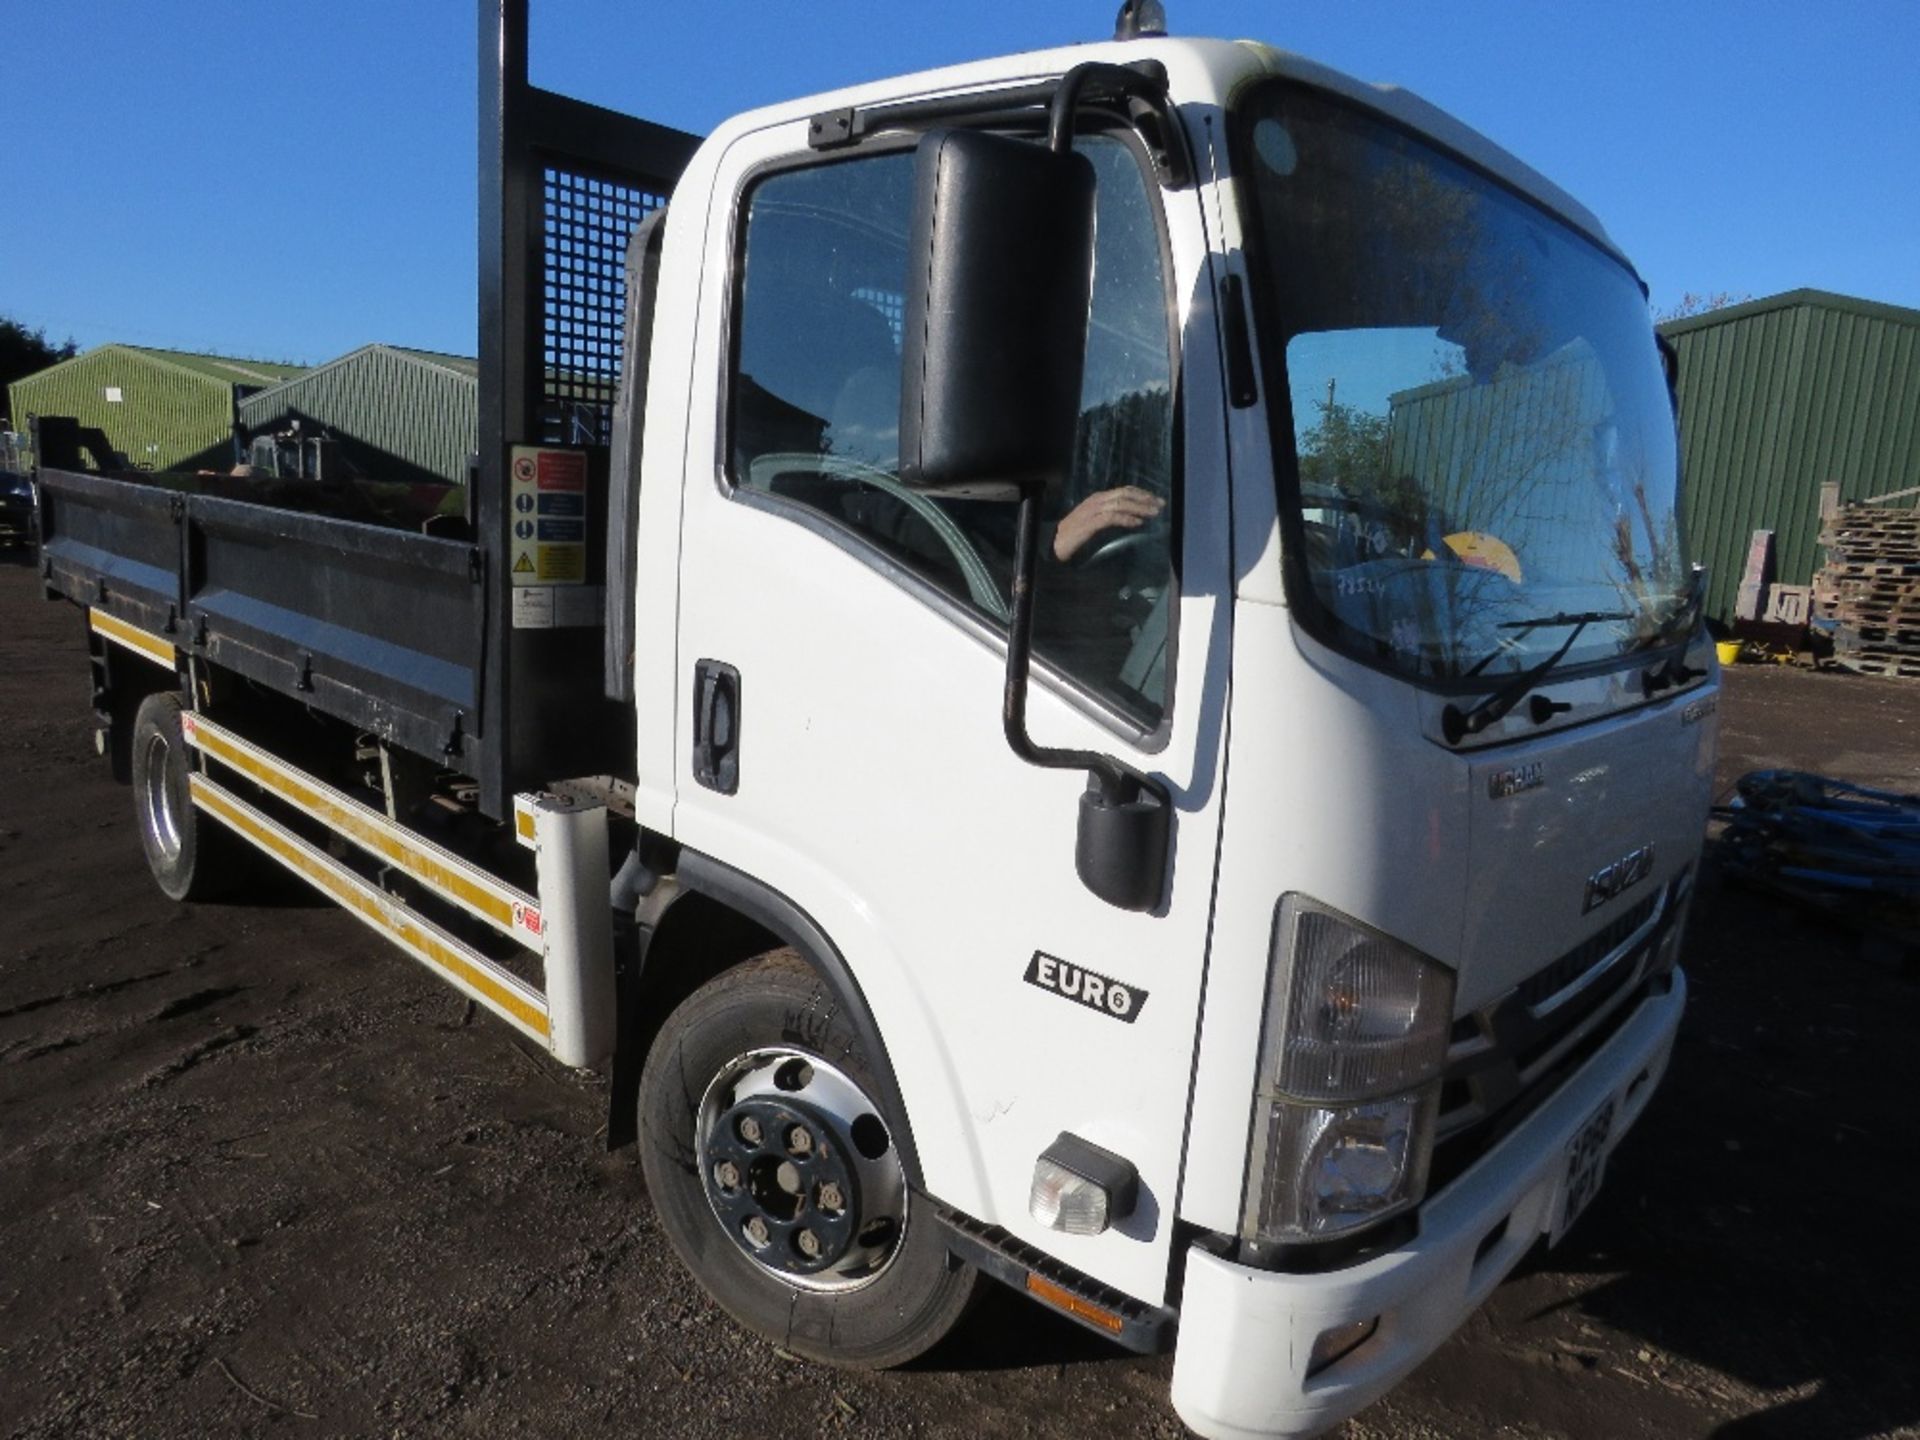 ISUZU URBAN EURO 6 7500KG TIPPER LORRY REG:AP68 NPX. ONE OWNER FROM NEW WITH V5. DIRECT FROM LOCAL U